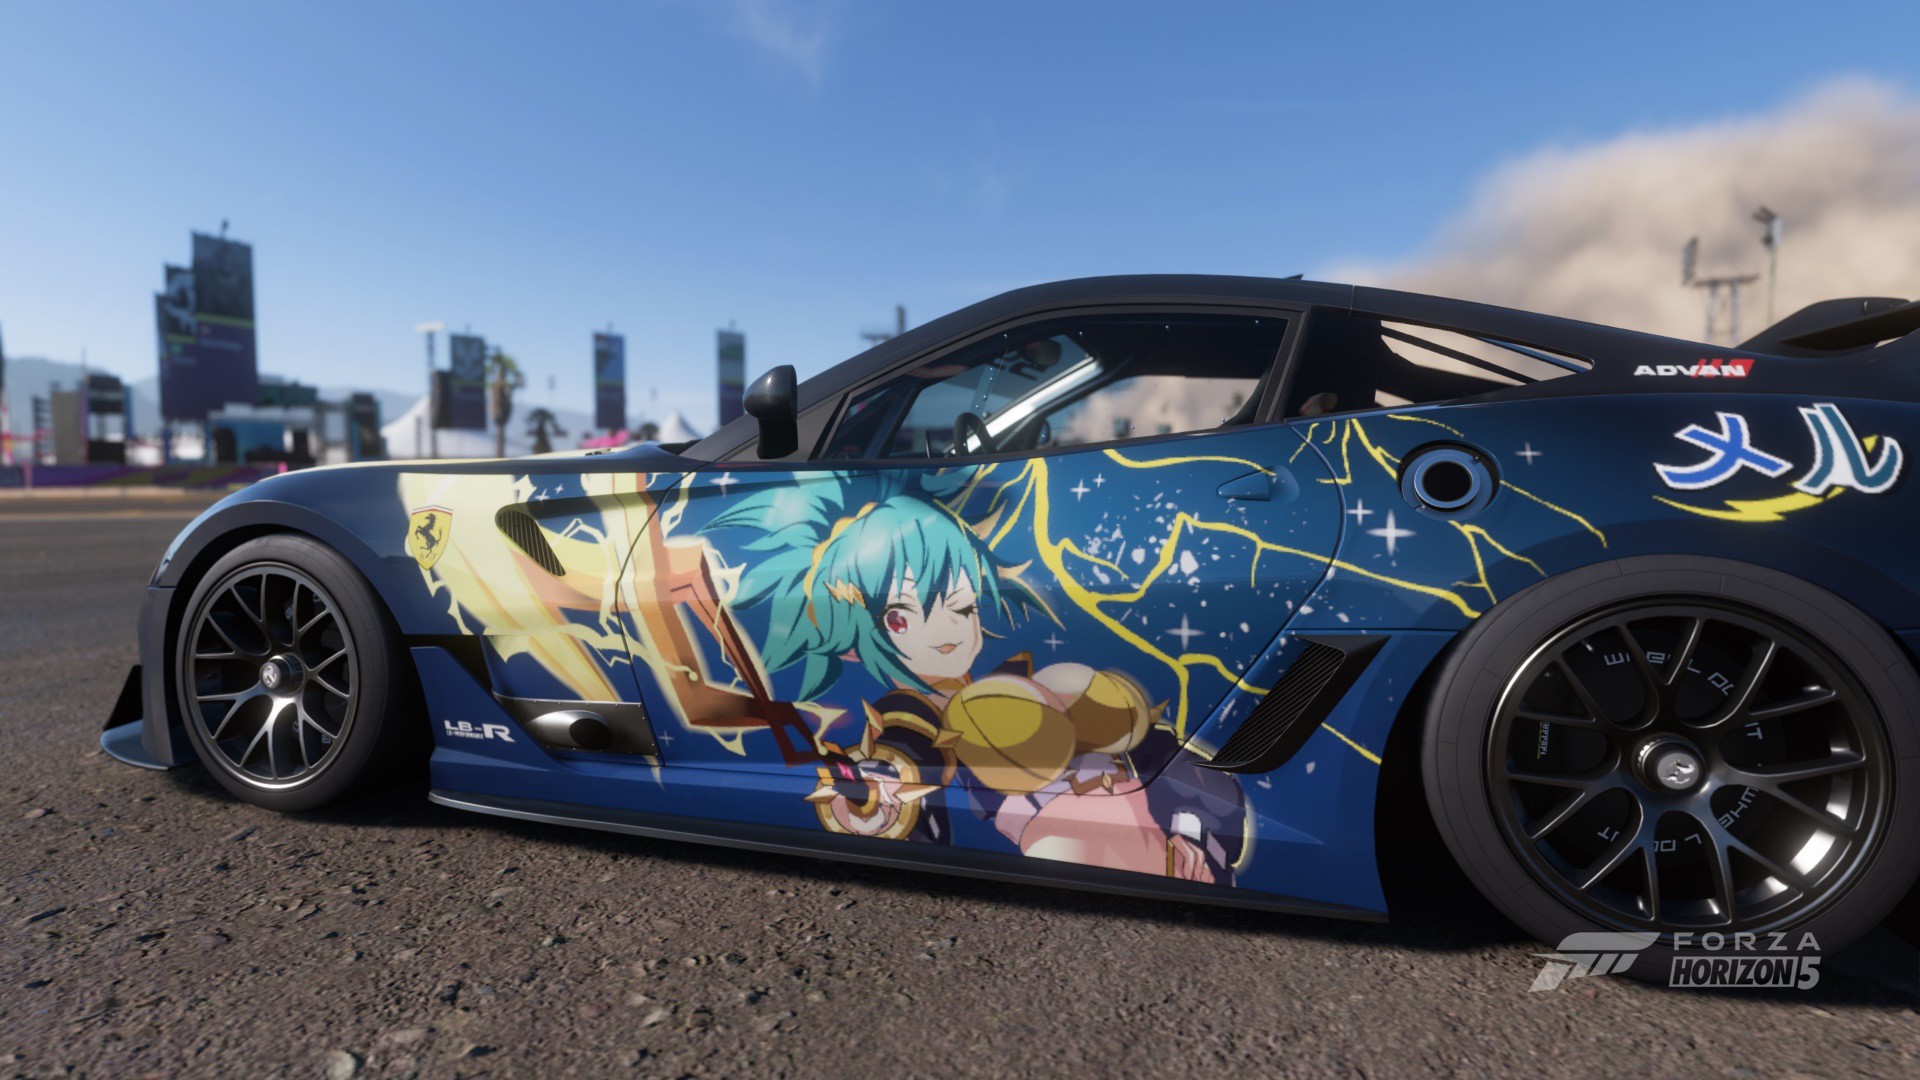 My 1st anime car design - Konosuba Mel, looking for comment - Paint Designs  - Official Forza Community Forums